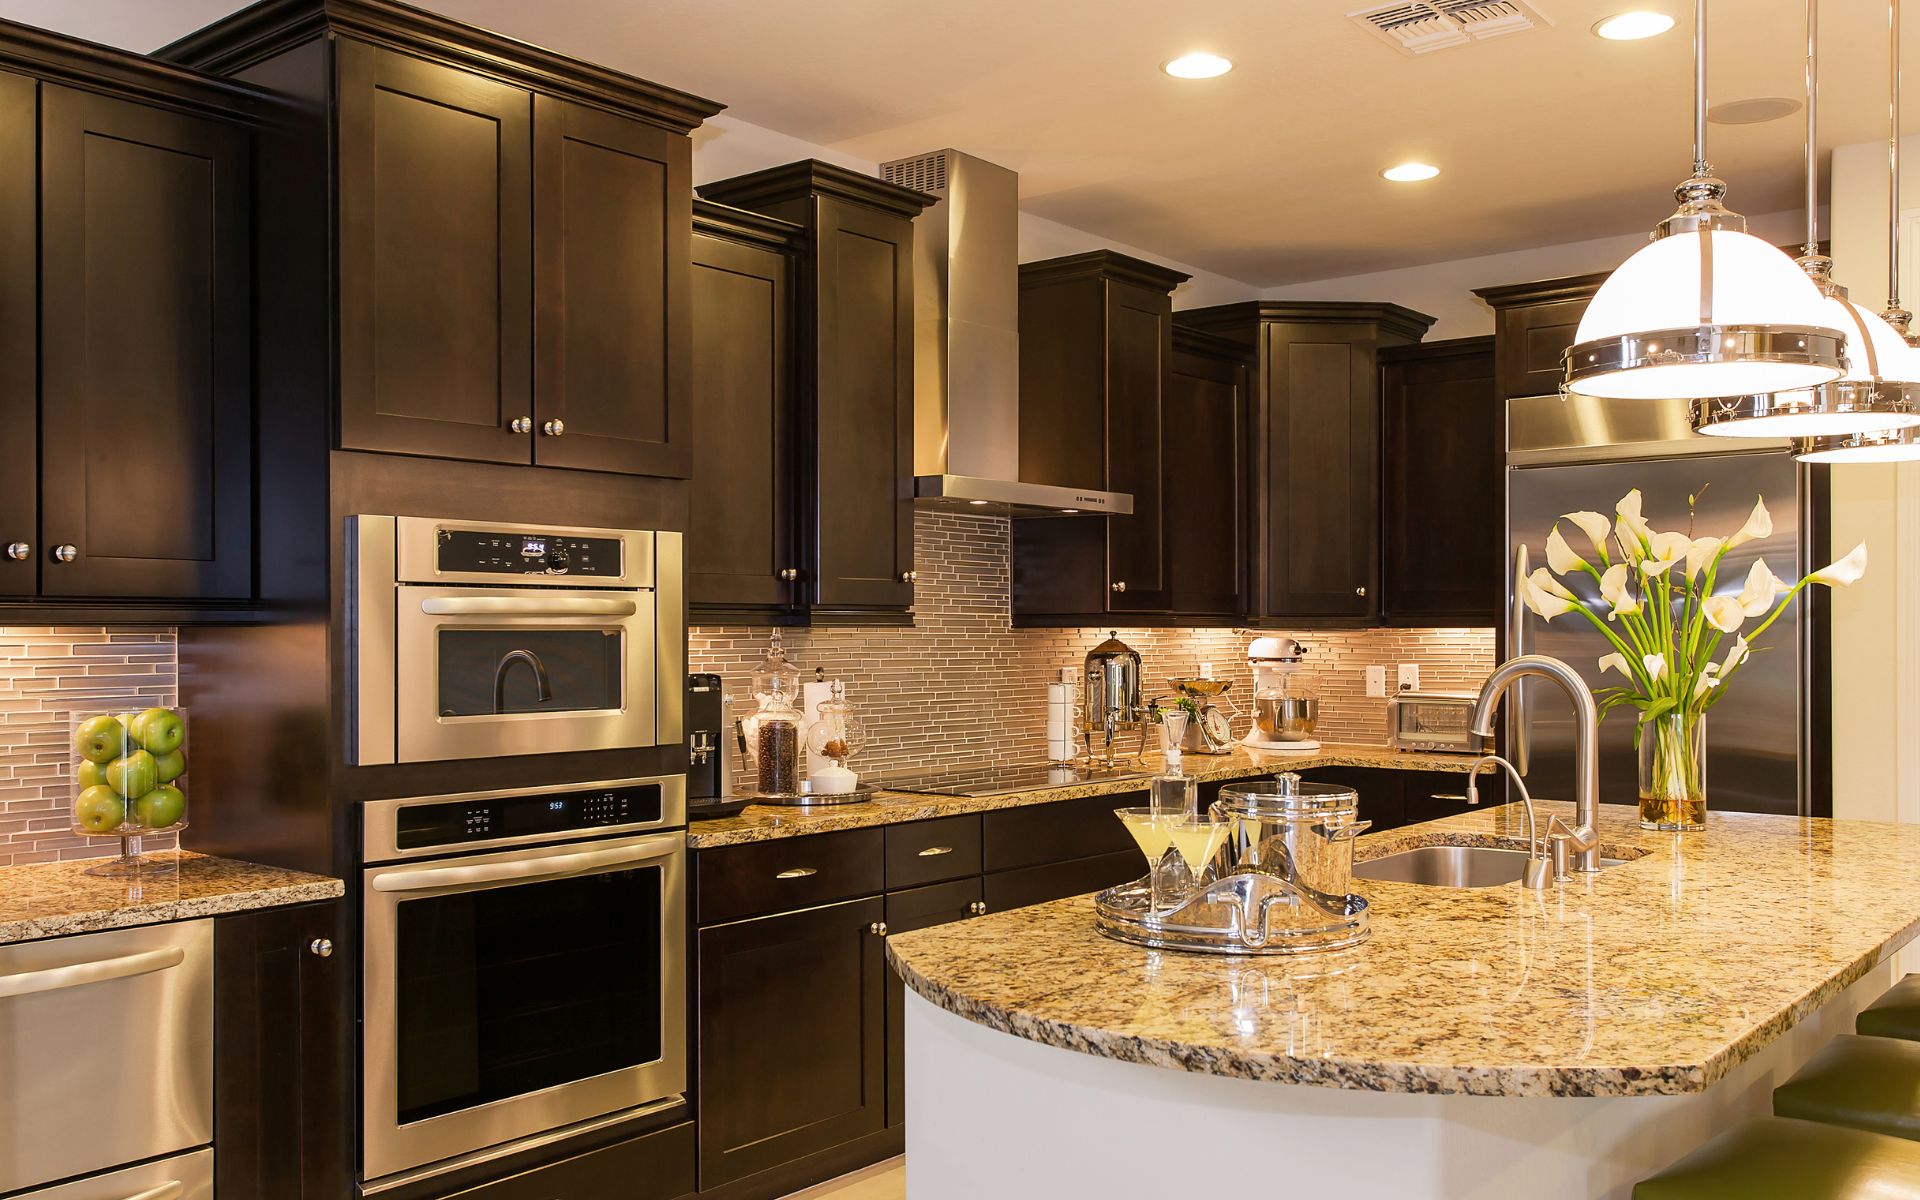 Traditional kitchen style with Dark brown cabinets